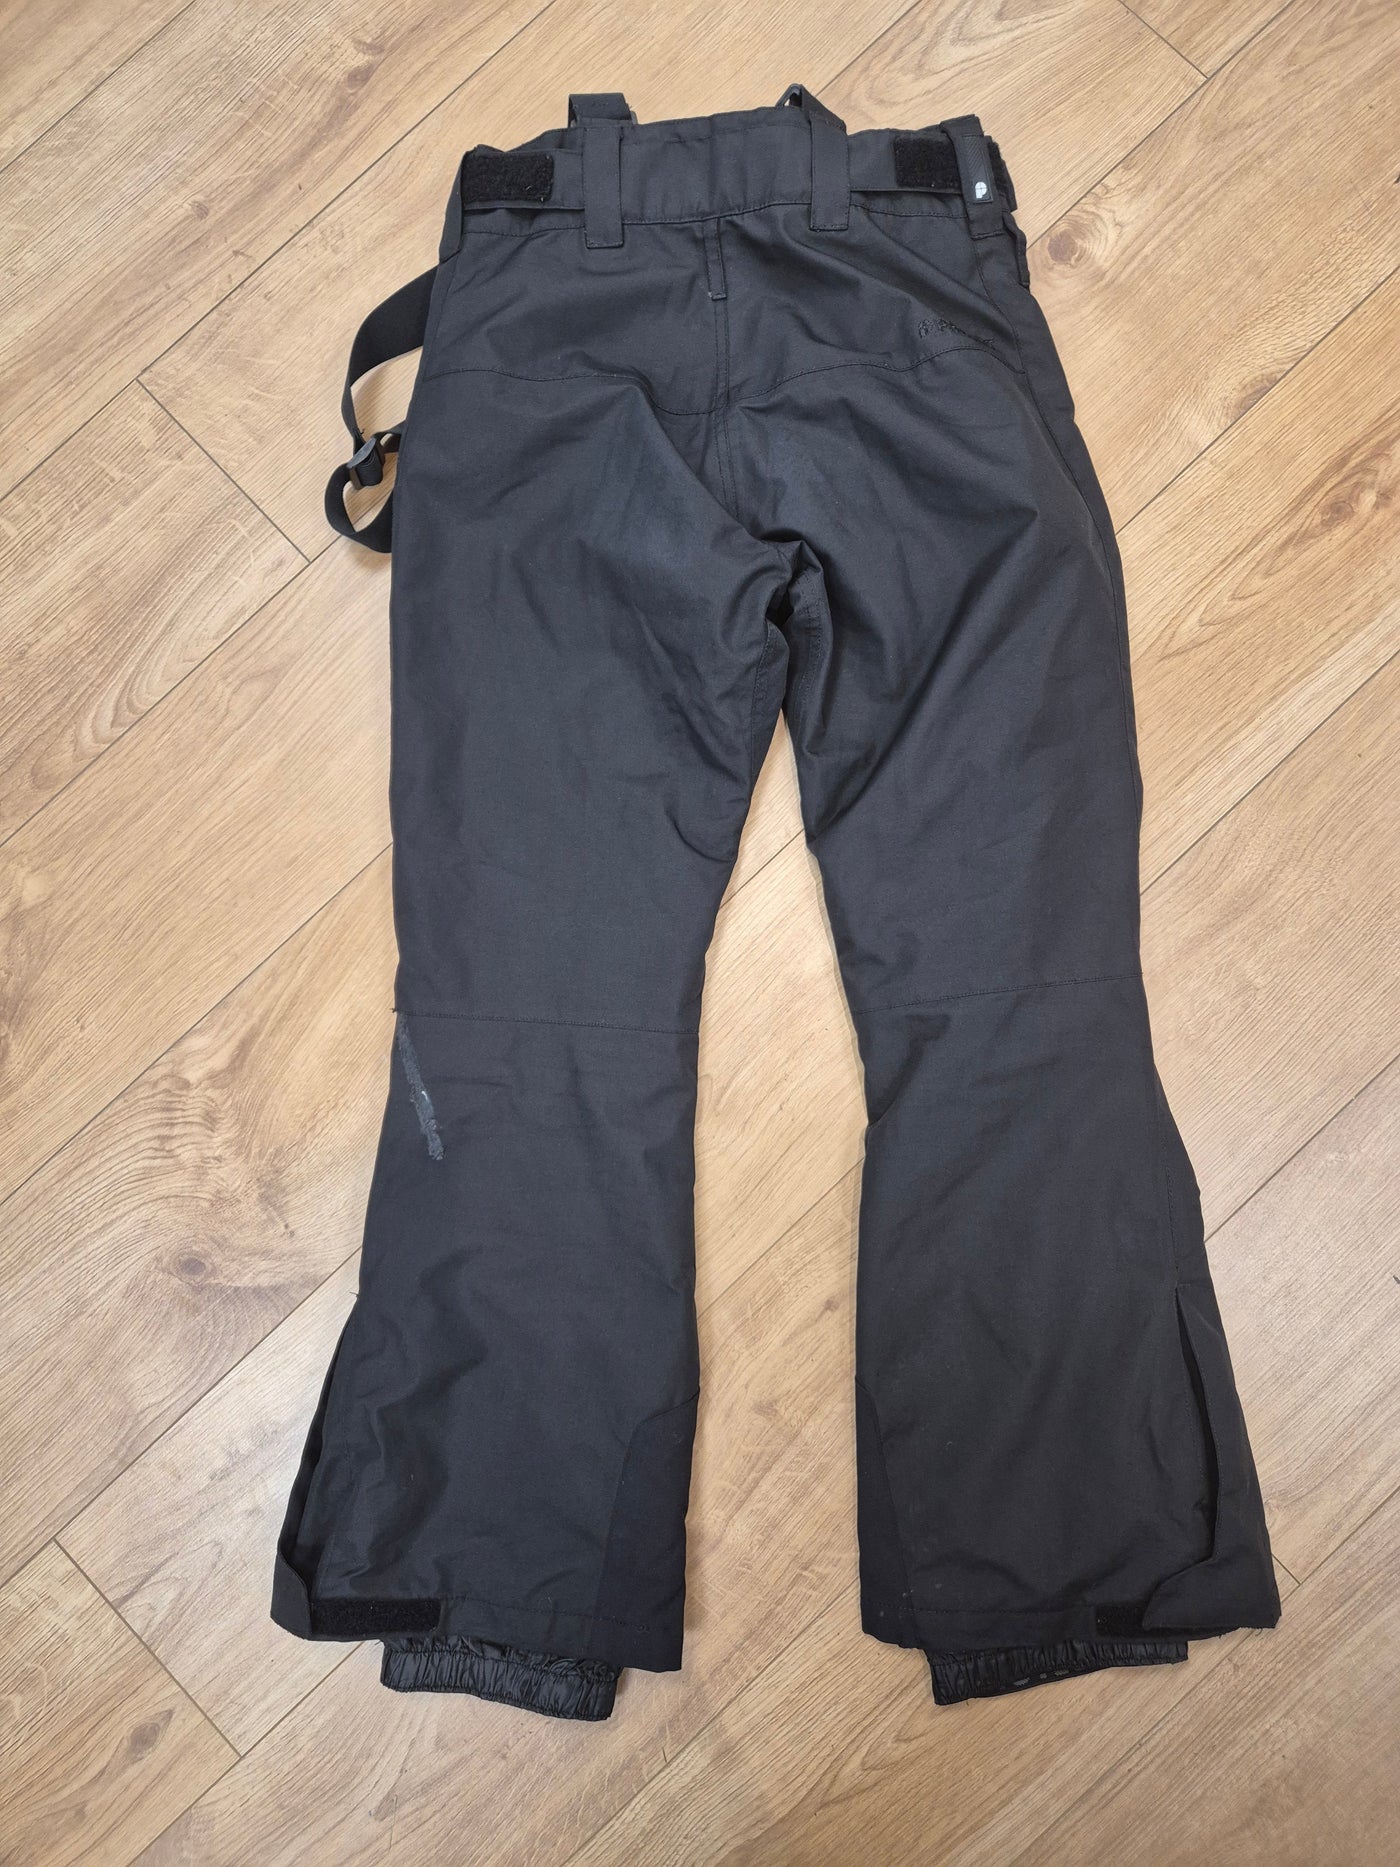 Pre-loved Protest Owens Mens Snow Trousers Extra Small (454) - Grade B